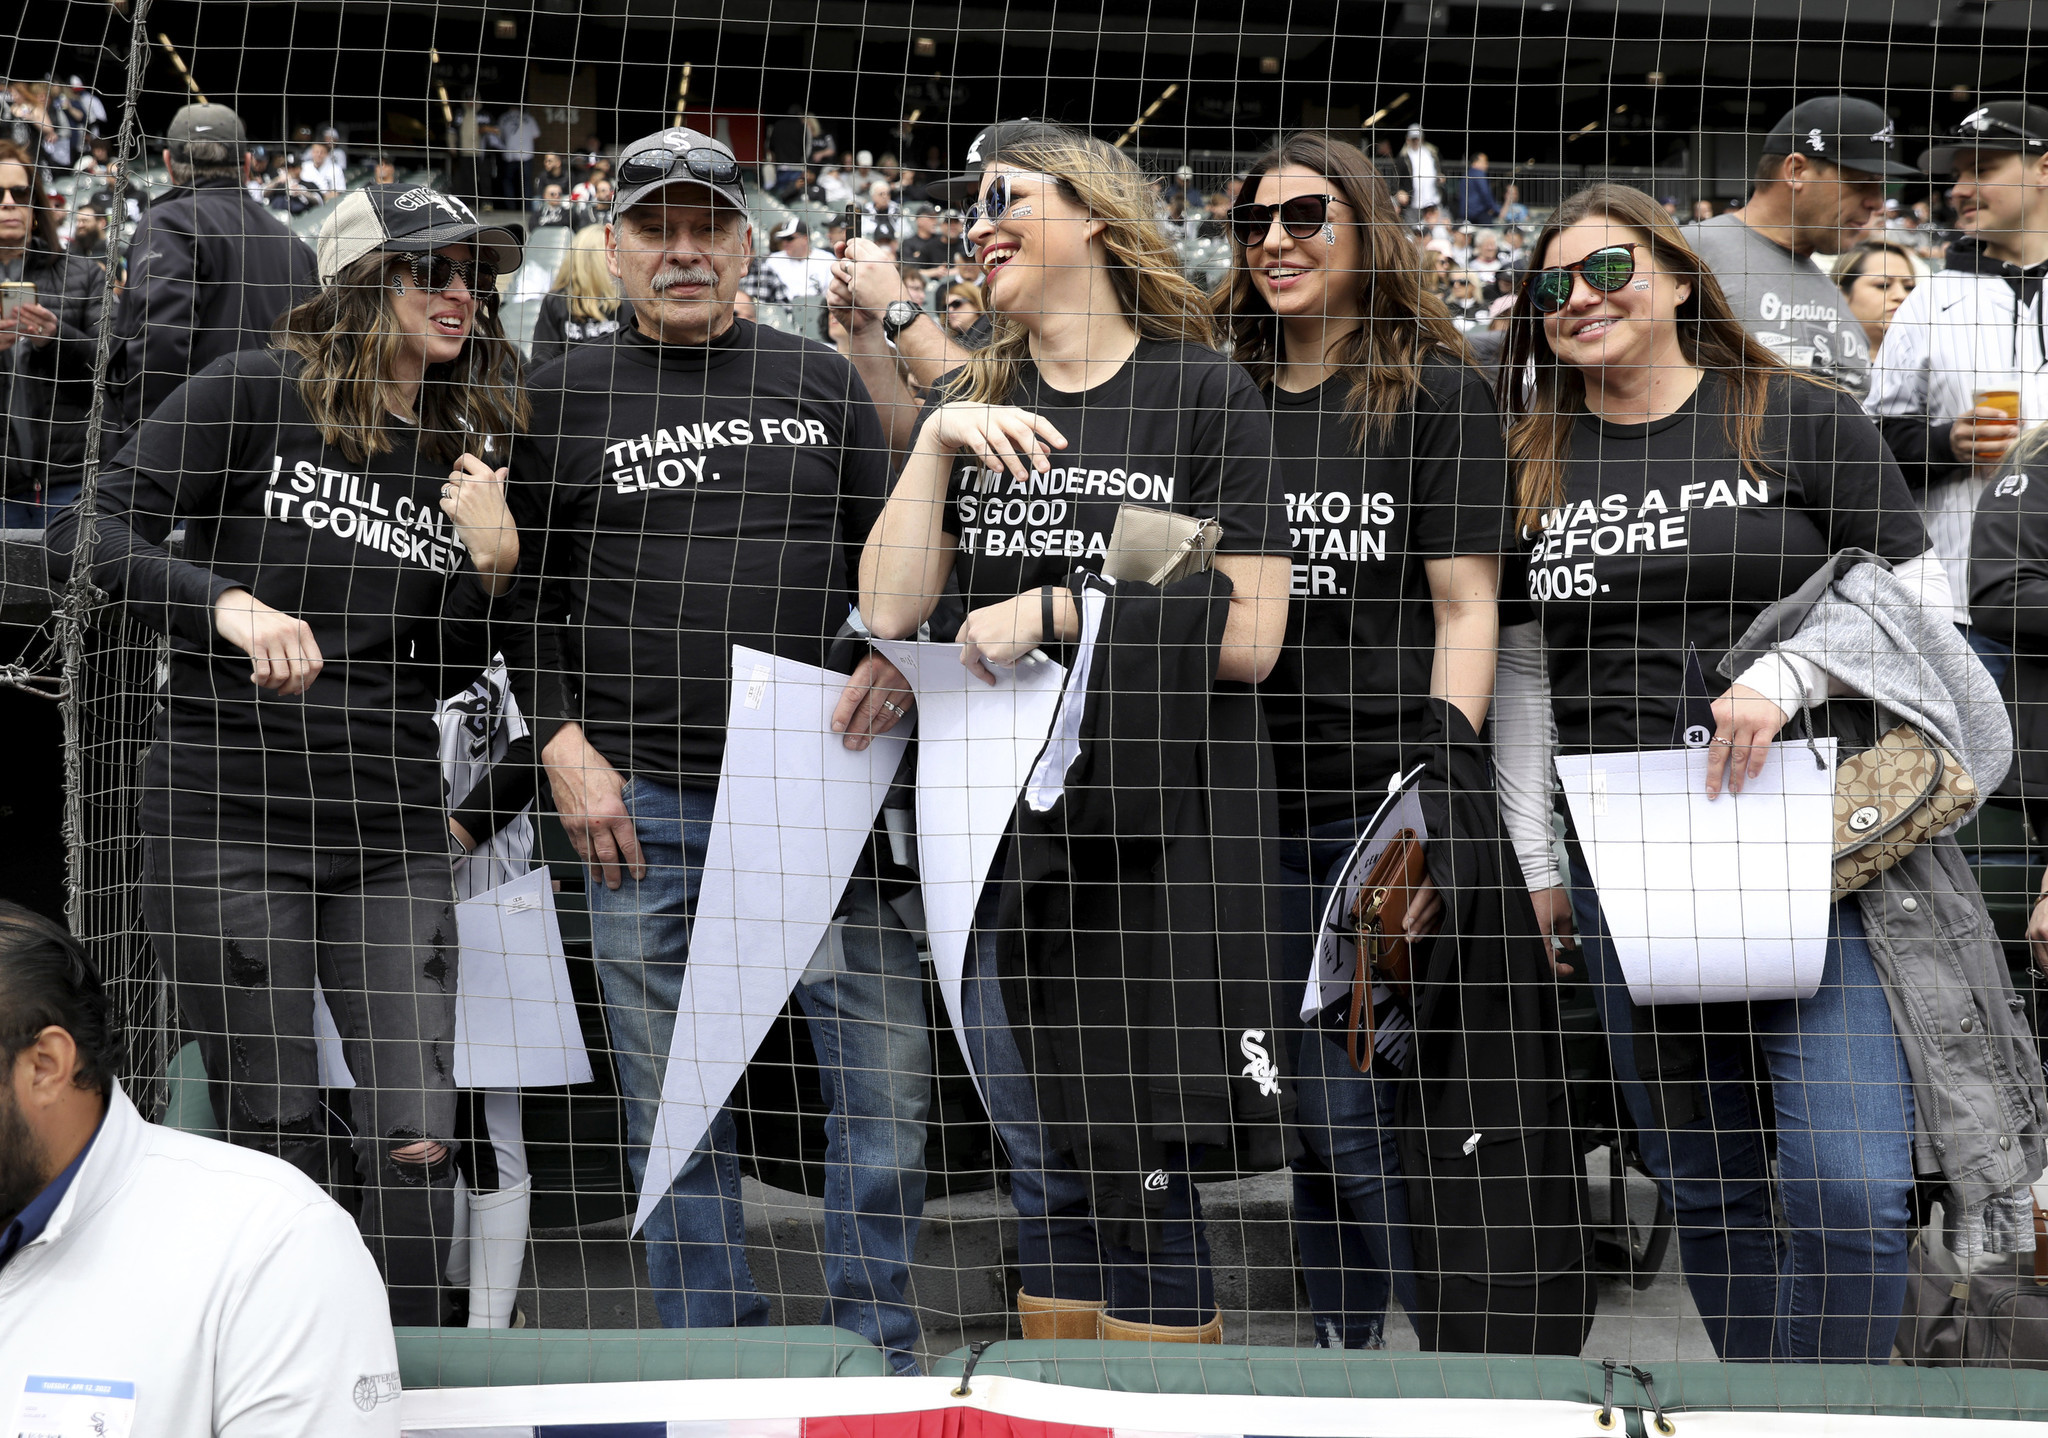 Rain holds off as White Sox fans gather for home opener - Chicago Sun-Times